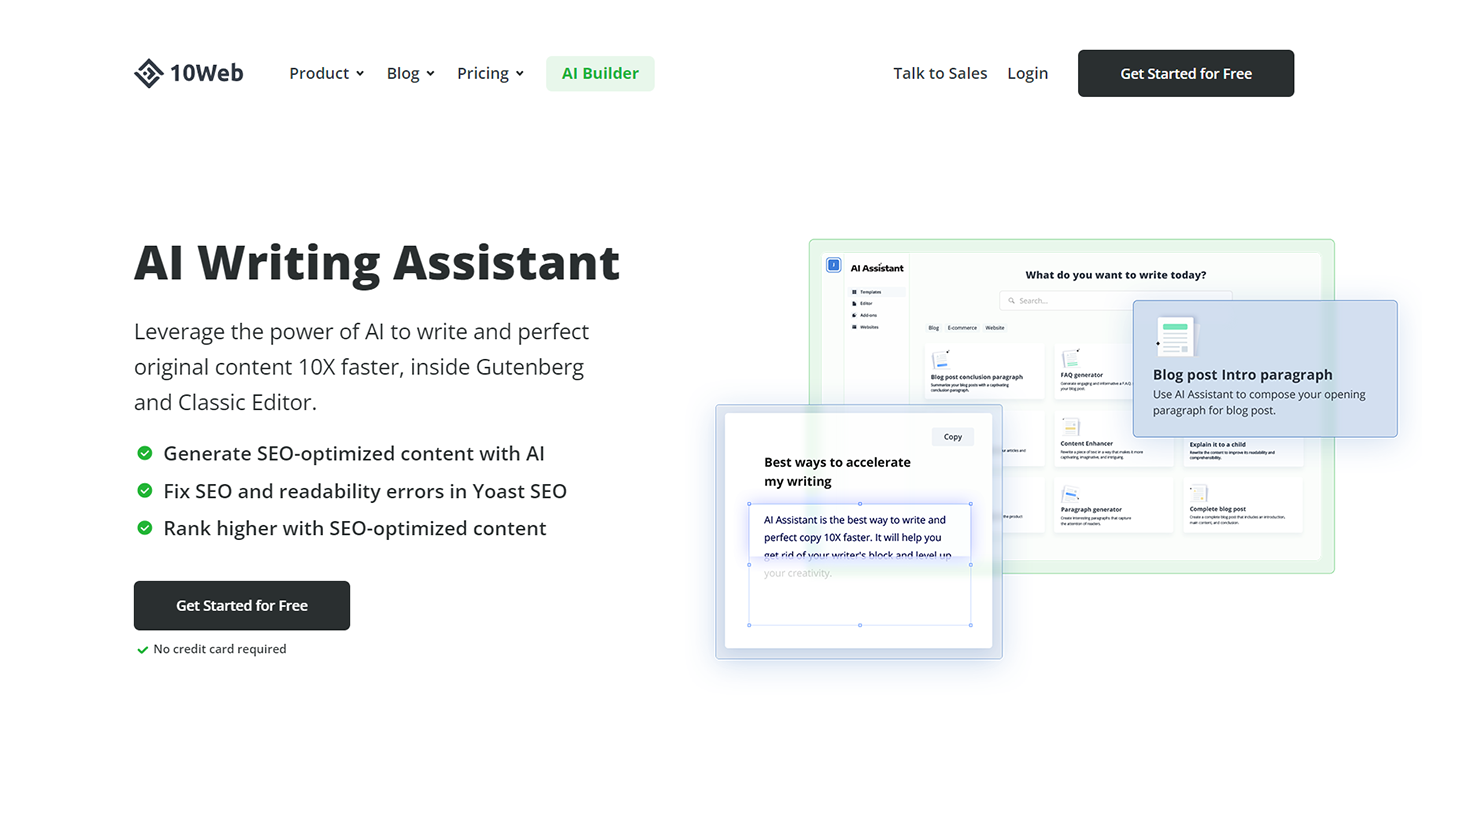 10Web AI Writing Assistant Landing Page